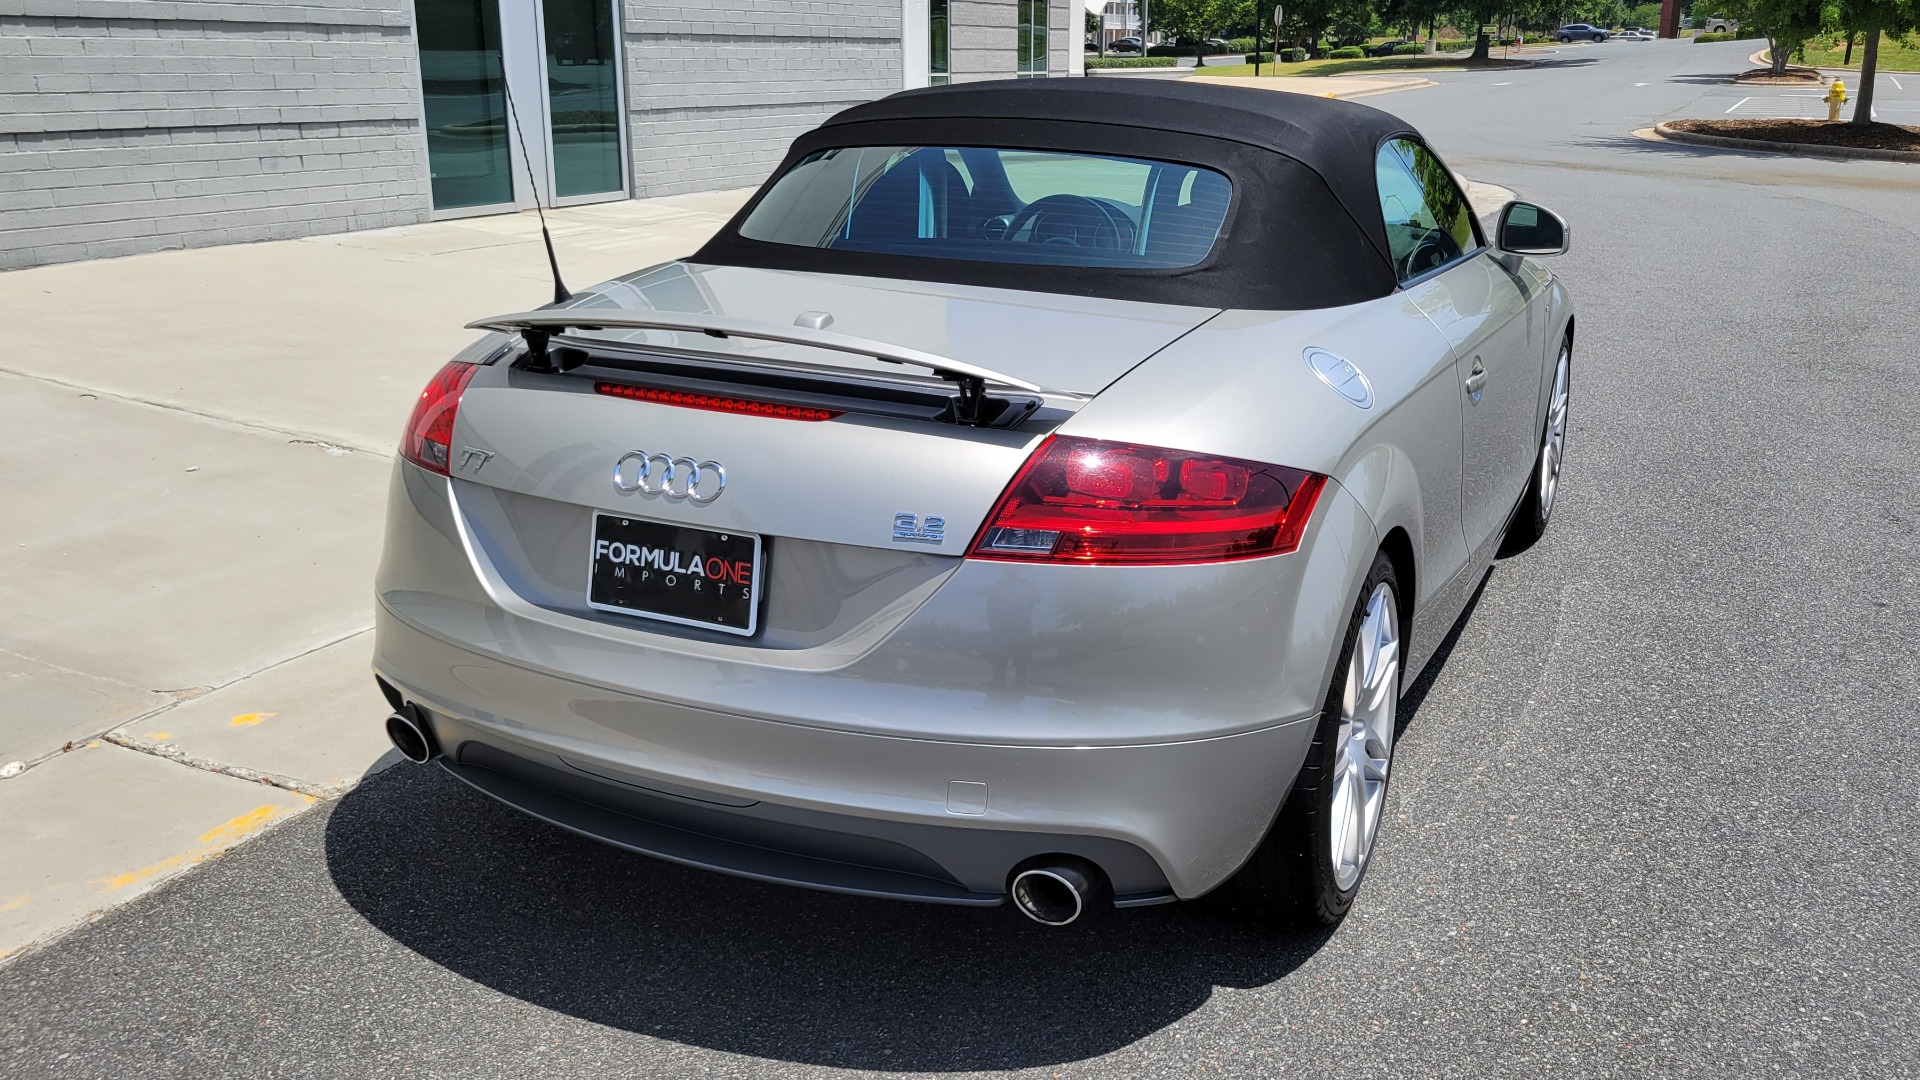 Used 2008 Audi TT 3.2L CONVERTIBLE / MANUAL / 19IN WHEELS / LOW MILES for sale Sold at Formula Imports in Charlotte NC 28227 9